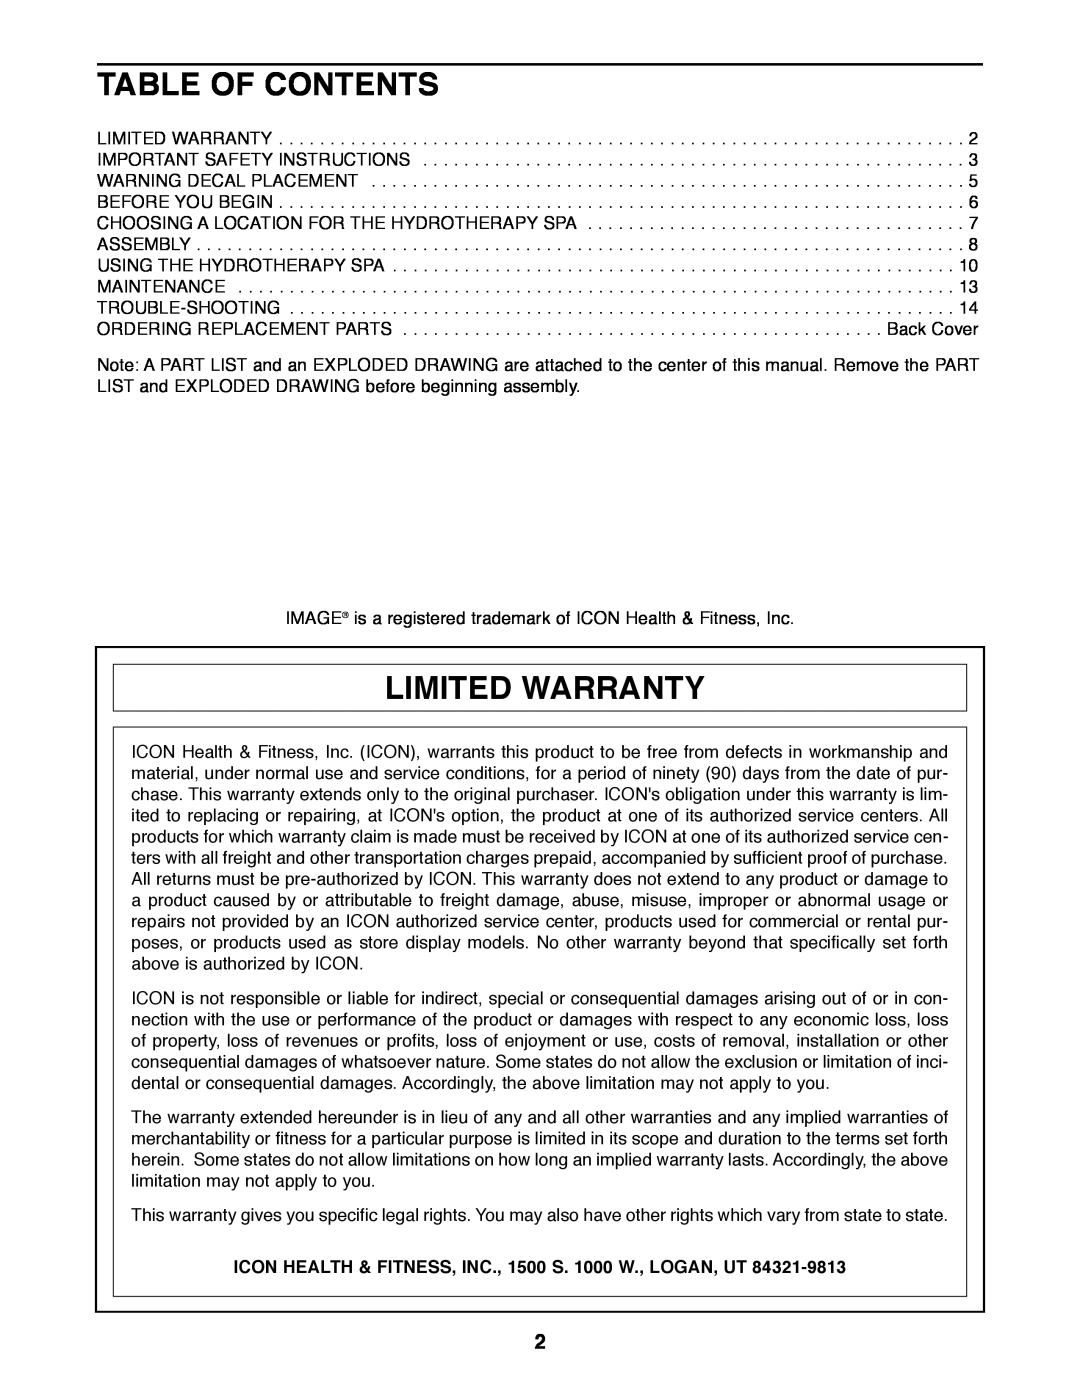 Image IMHS80081 manual Table Of Contents, Limited Warranty 